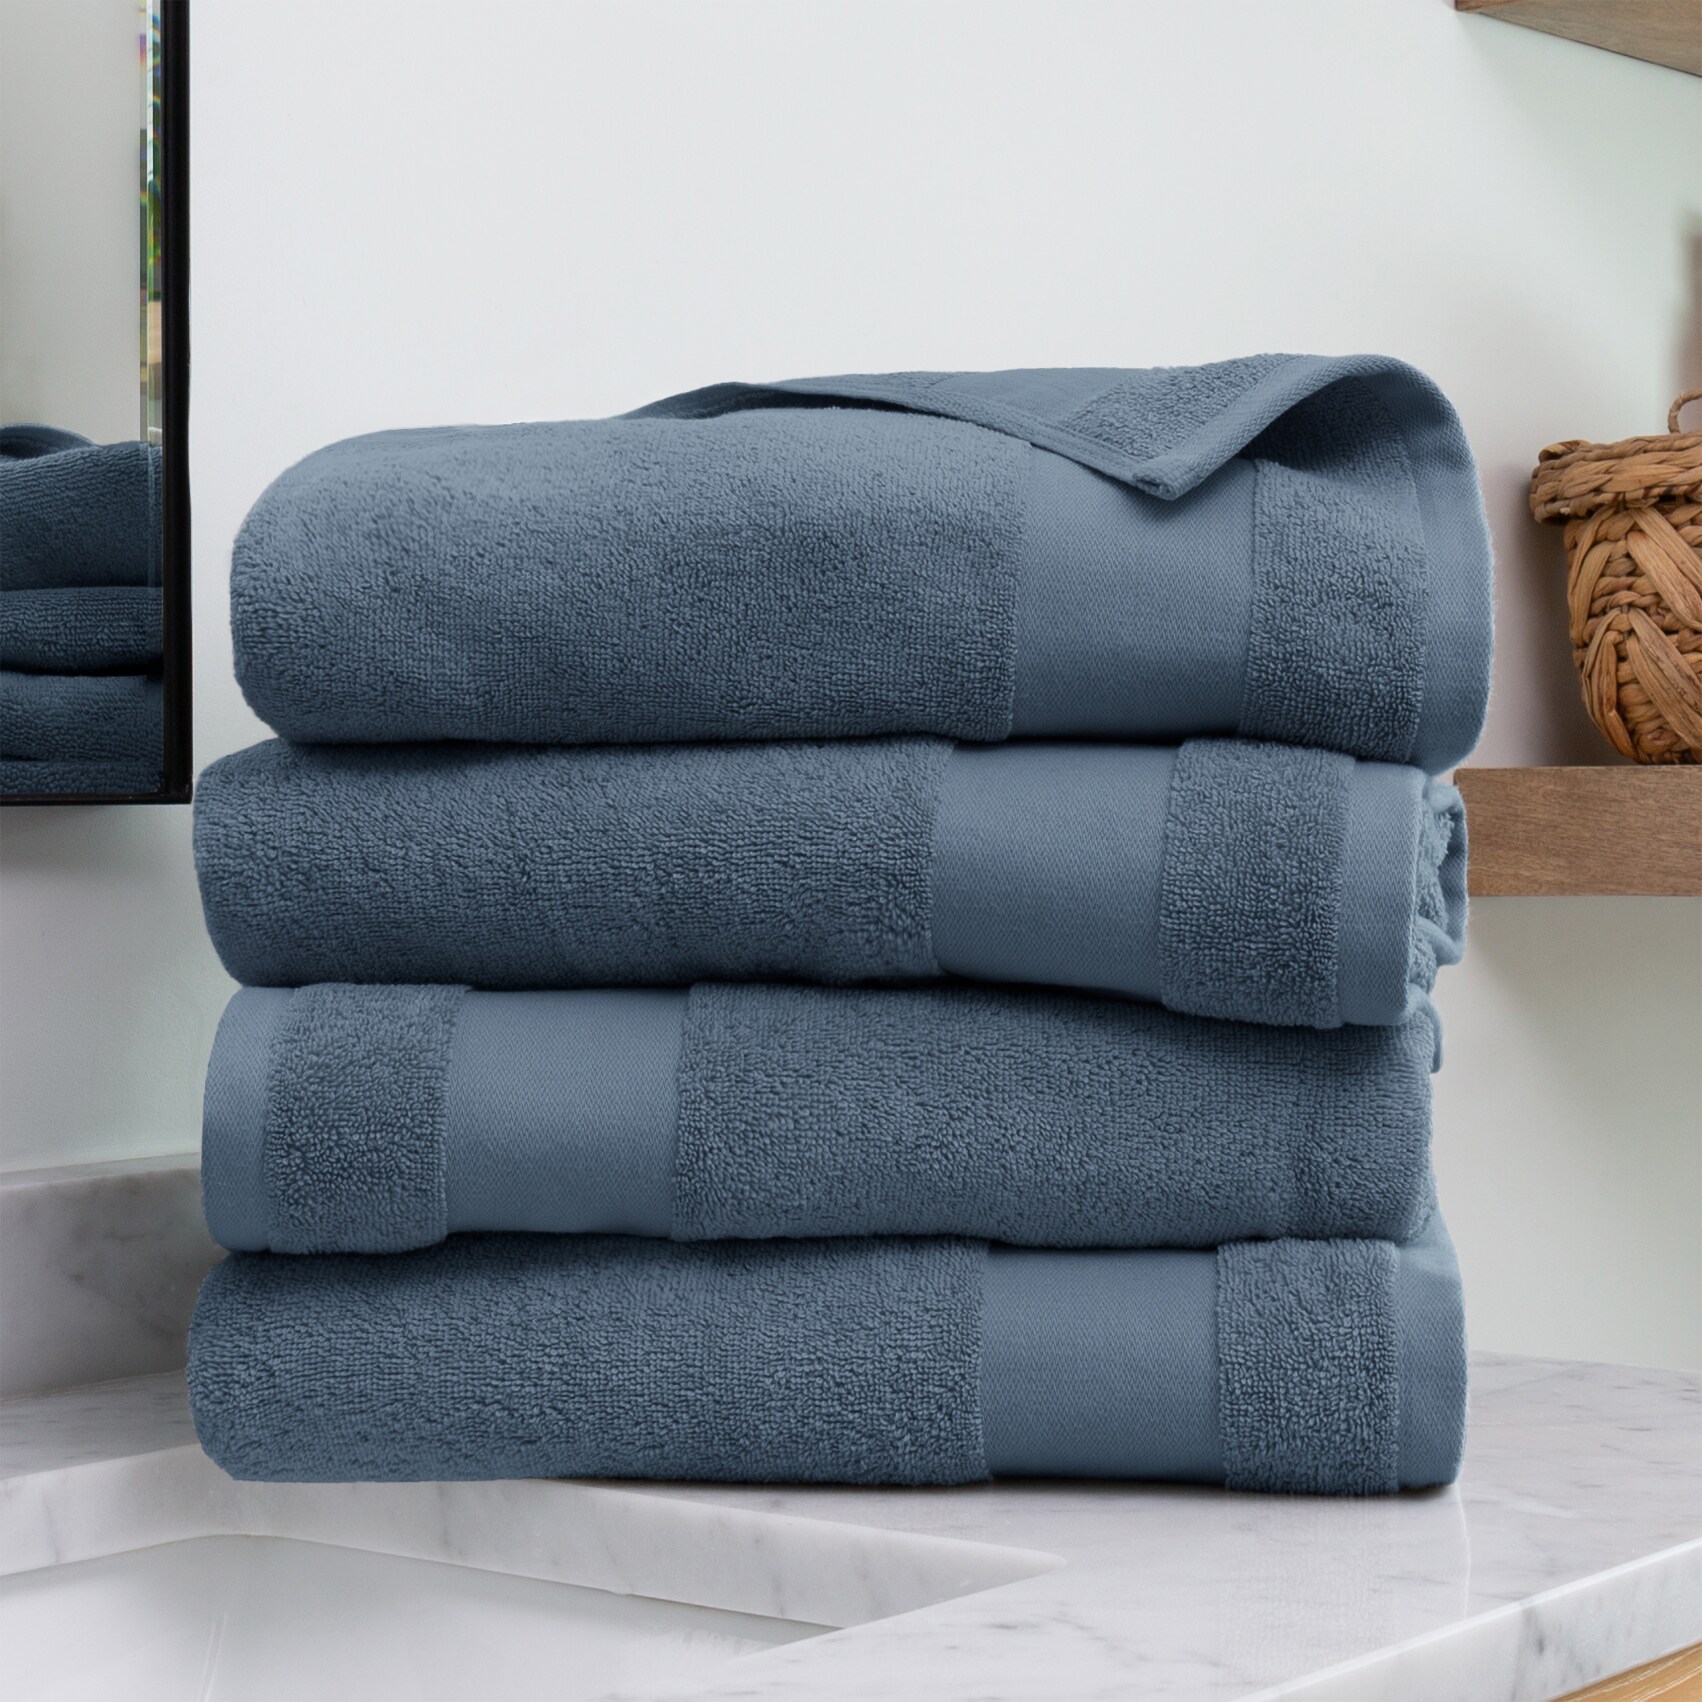 100% Cotton 4-Piece Bath Towels - Extra Soft Fade-Resistant Towels - 54 inch x 27 inch - (Silver), Size: 4 Bath Towels - 54 x 27